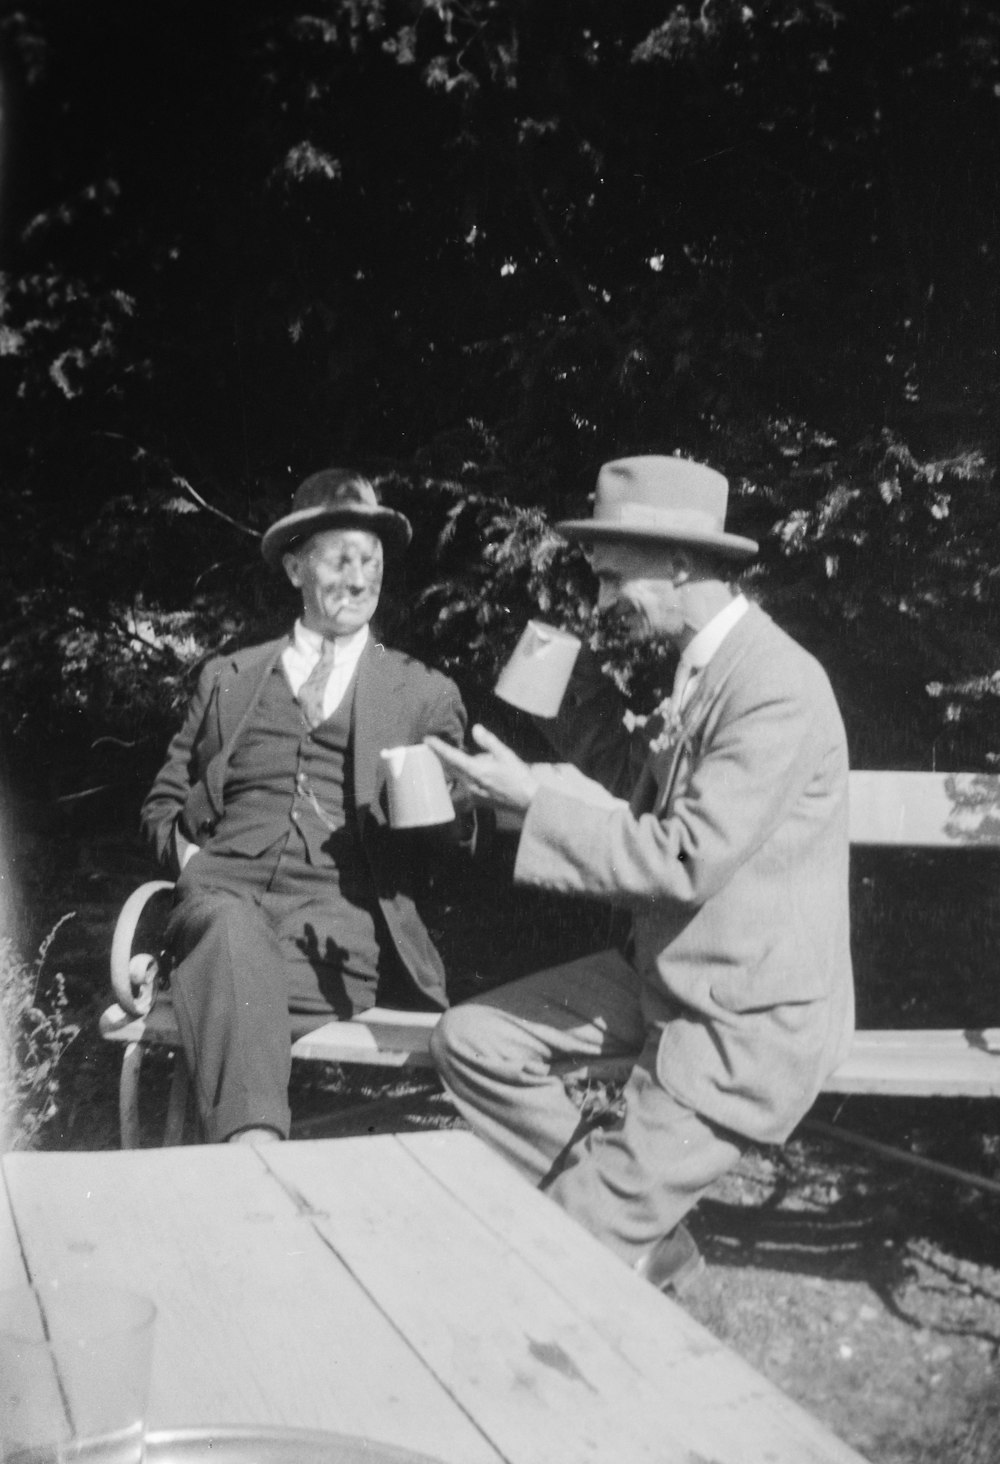 an old photo of two men sitting on a bench